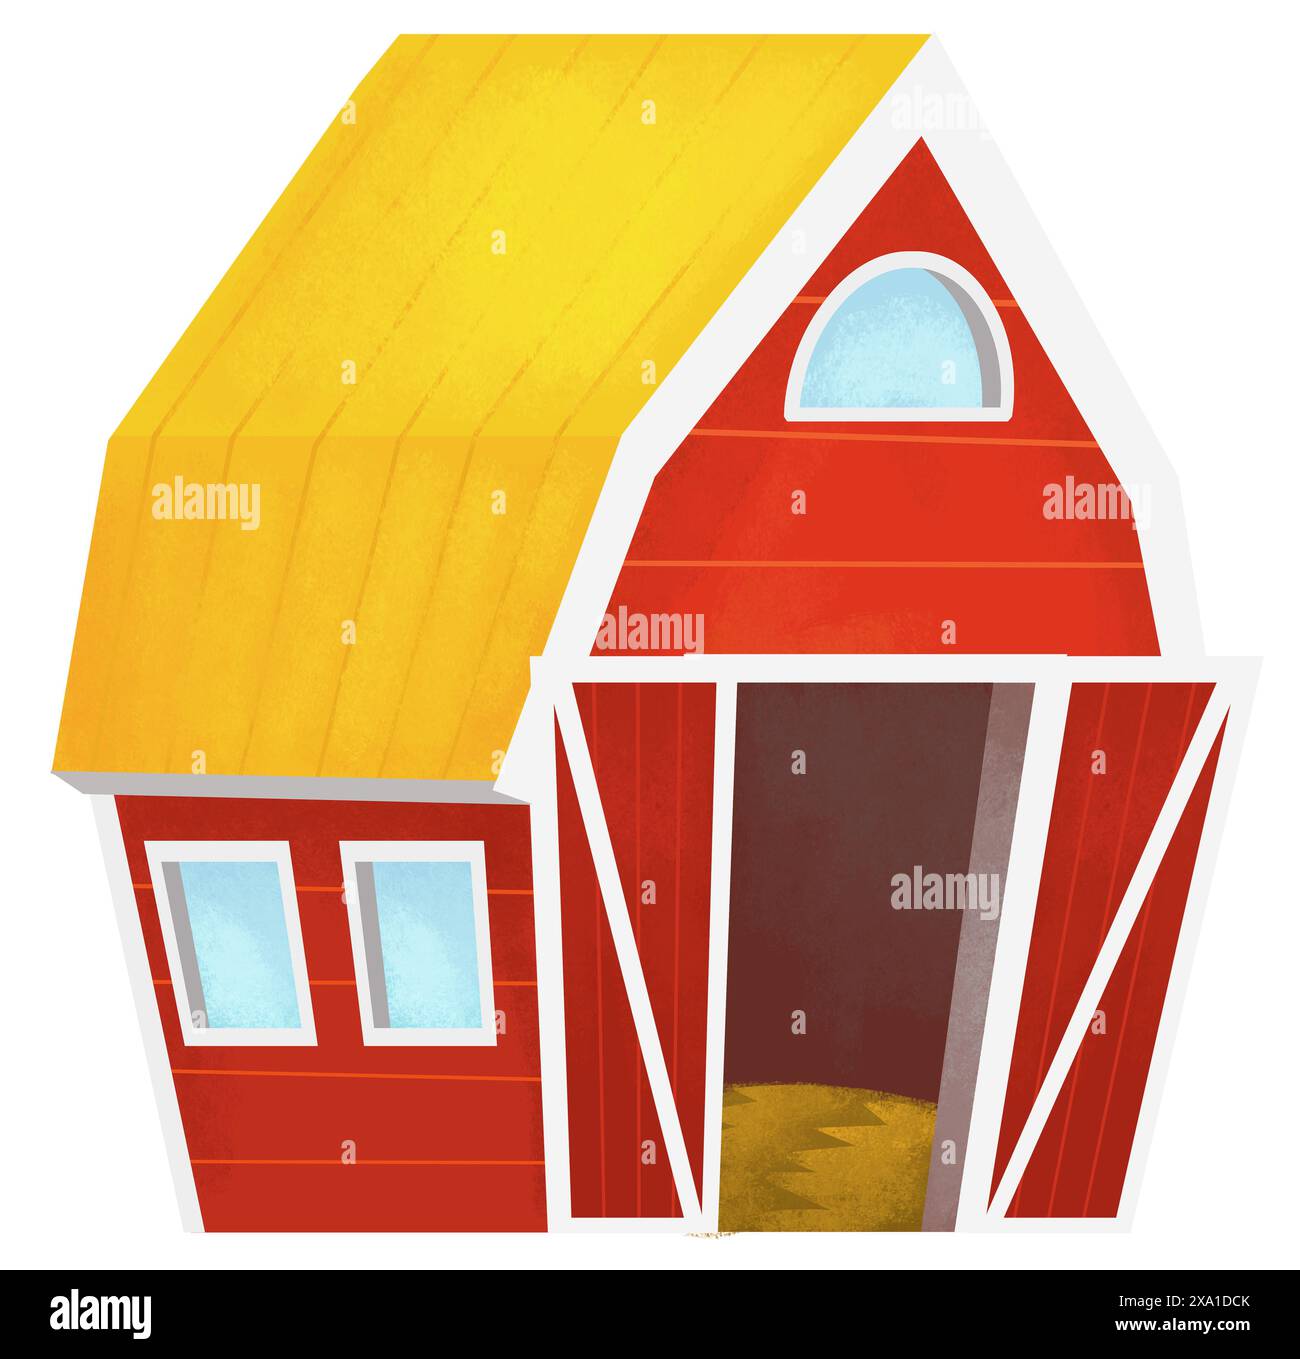 Cartoon scene with wooden farm building red barn stable house colorful planks isolated background illustration for kids Stock Photo